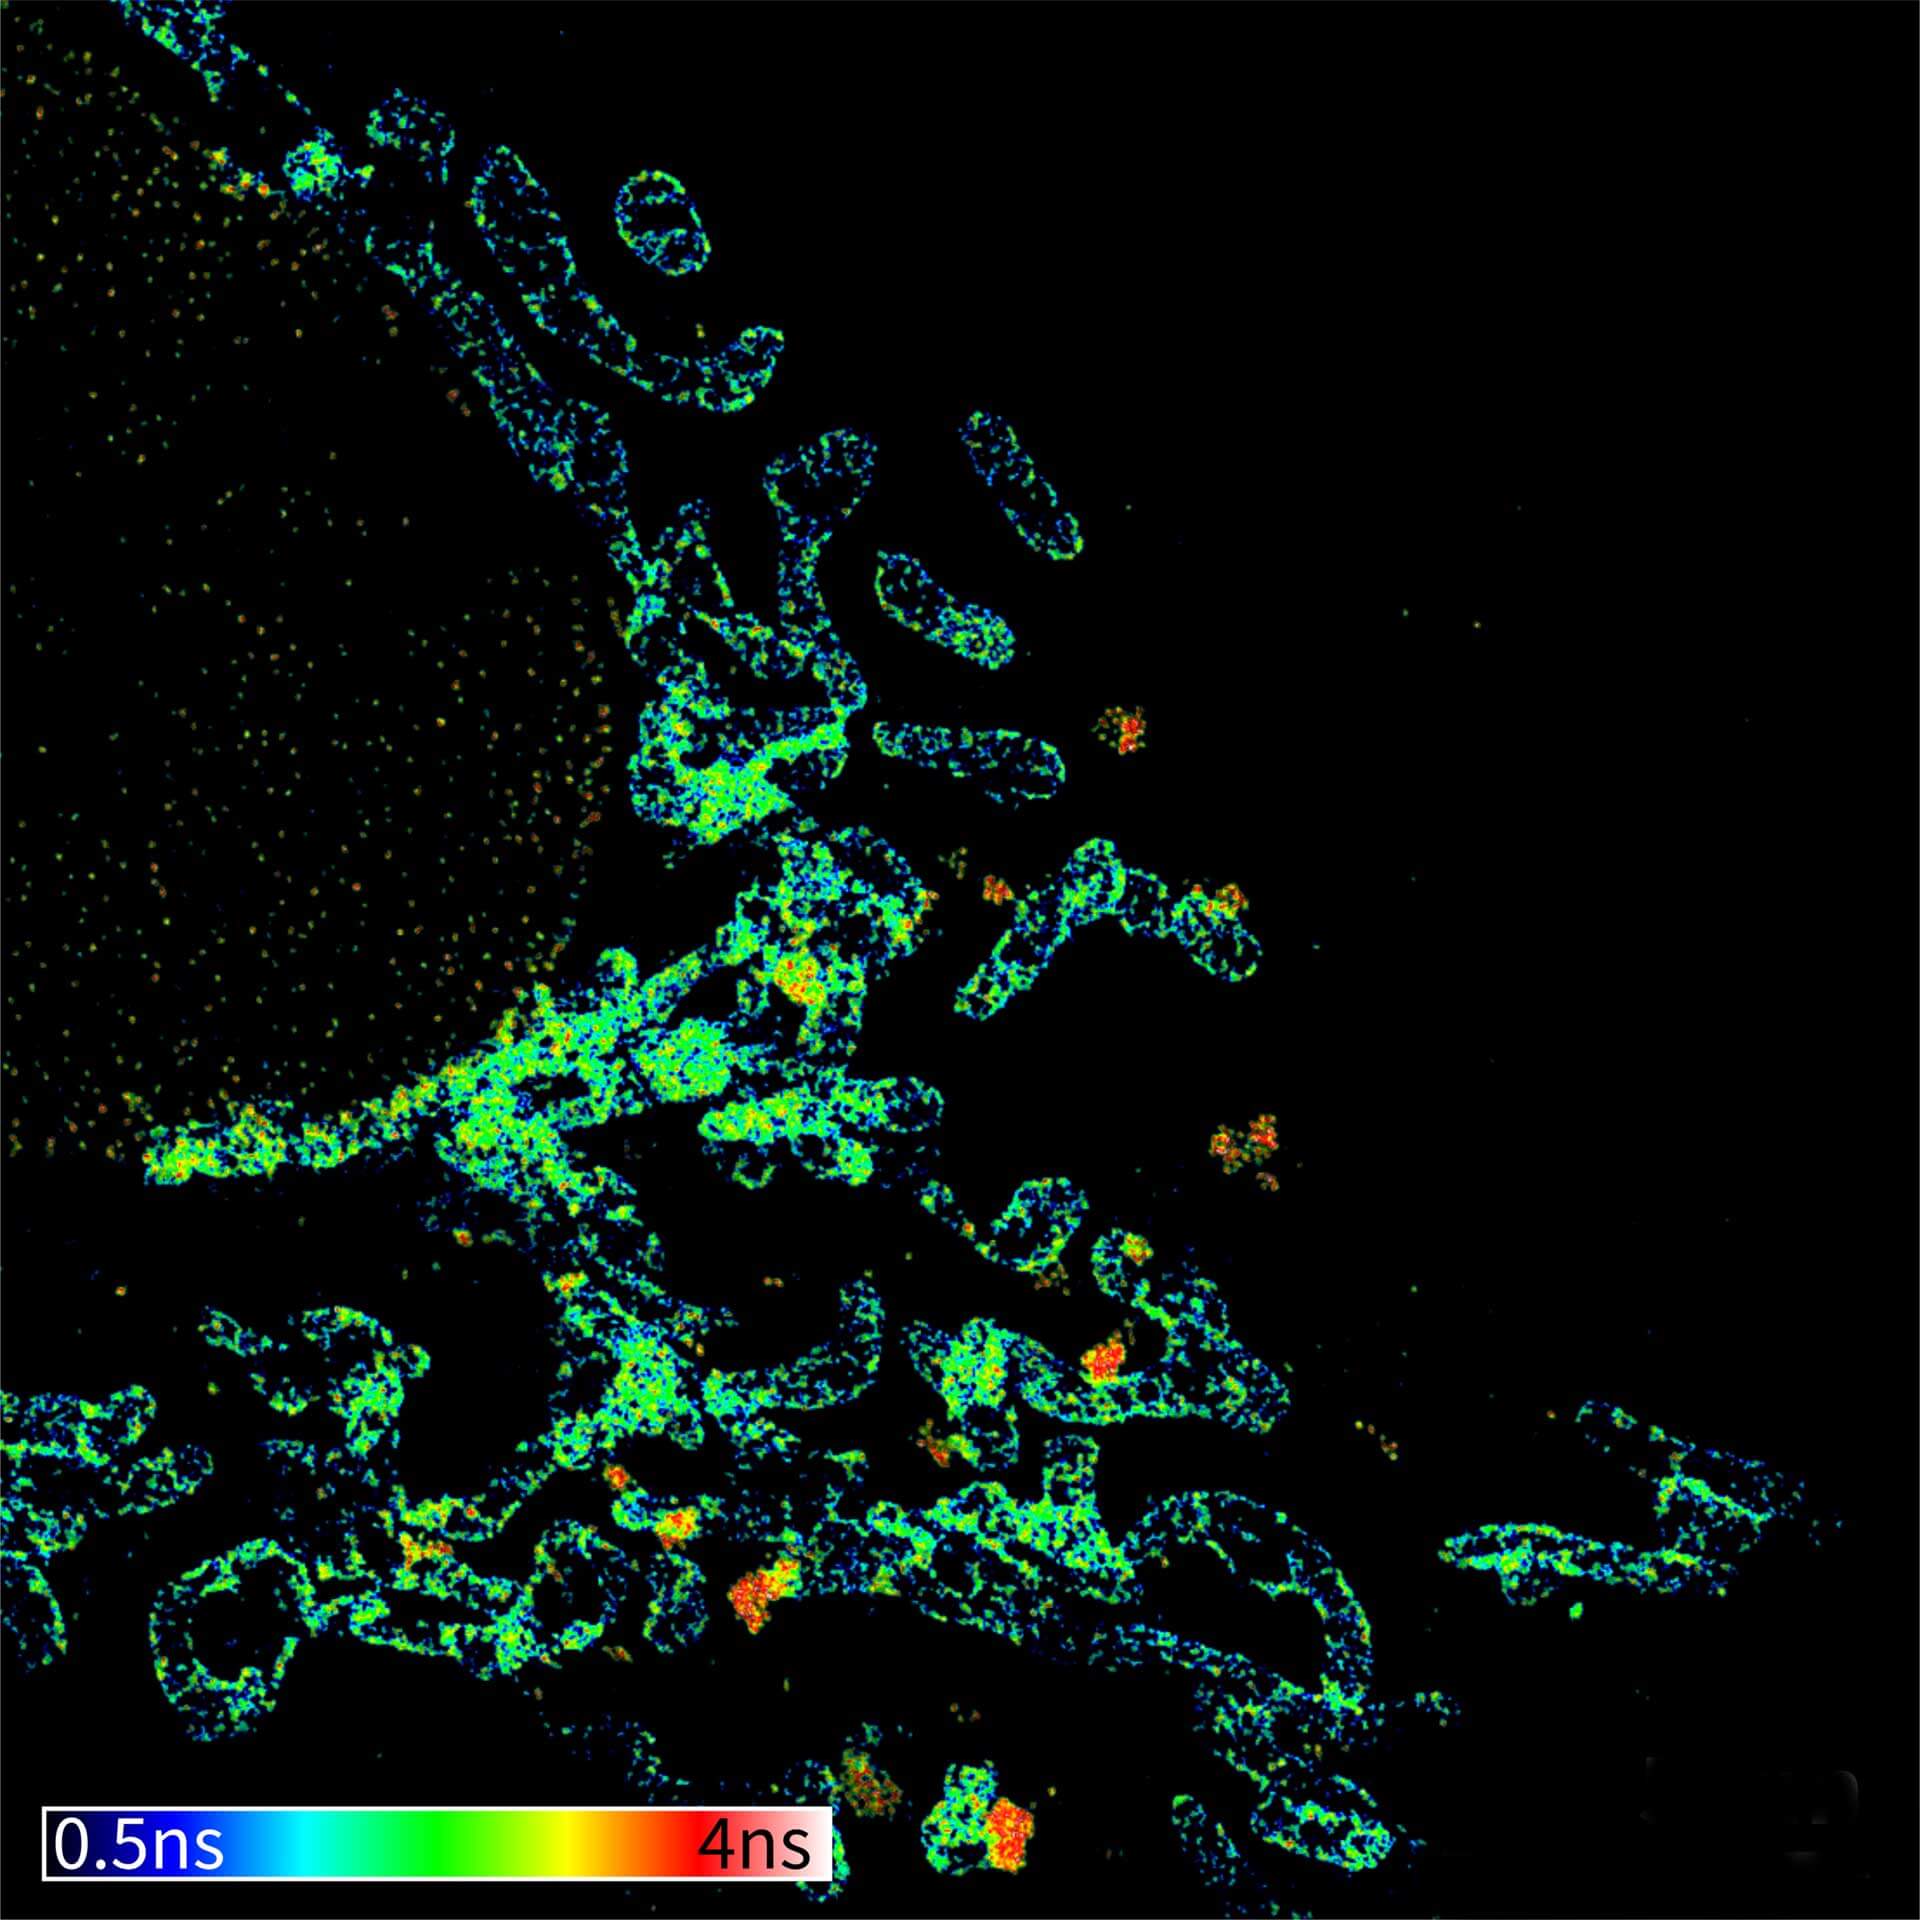 TIMEBOW image of mammalian cells labeled with antibodies against Tom20/Atto 647N and Nup153/abberior STAR 635P. Note that nuclear pore (Nup) complex subunits appear to be localized in the cytoplasm, which is due to the Nup import pathway into the nuclear membrane.